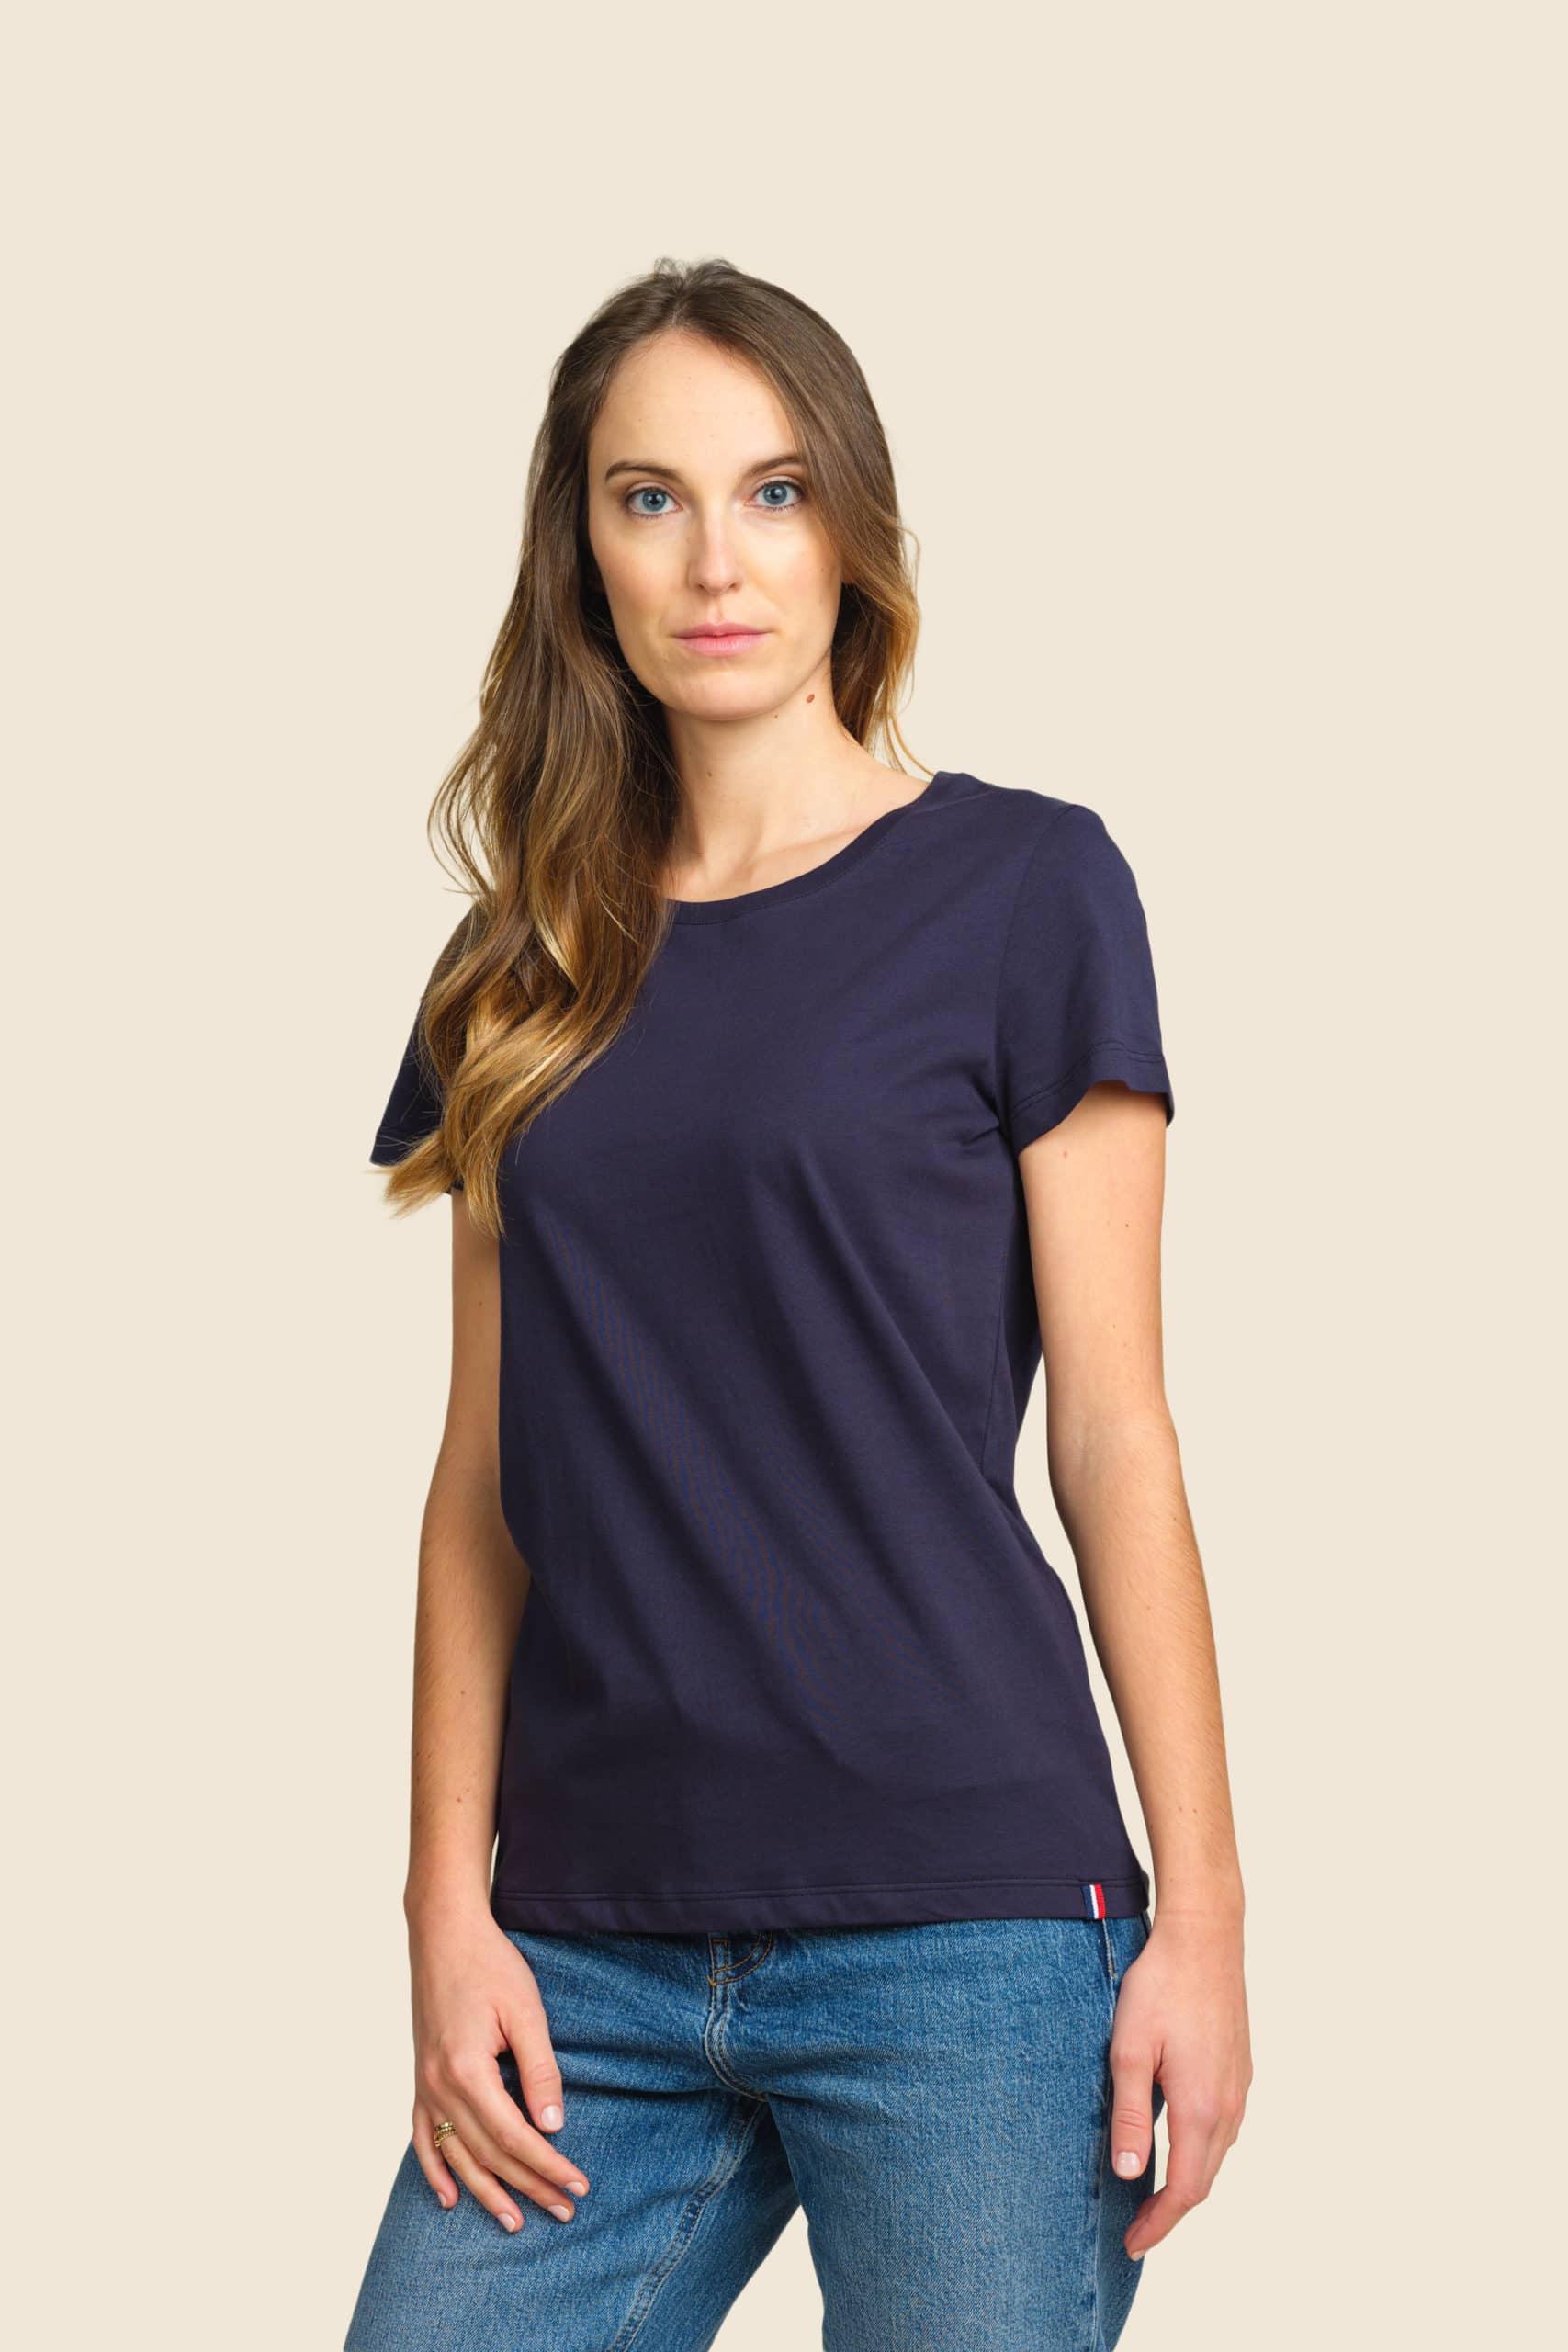 t-shirt bleu femme made in france personnalisable - Icone Design